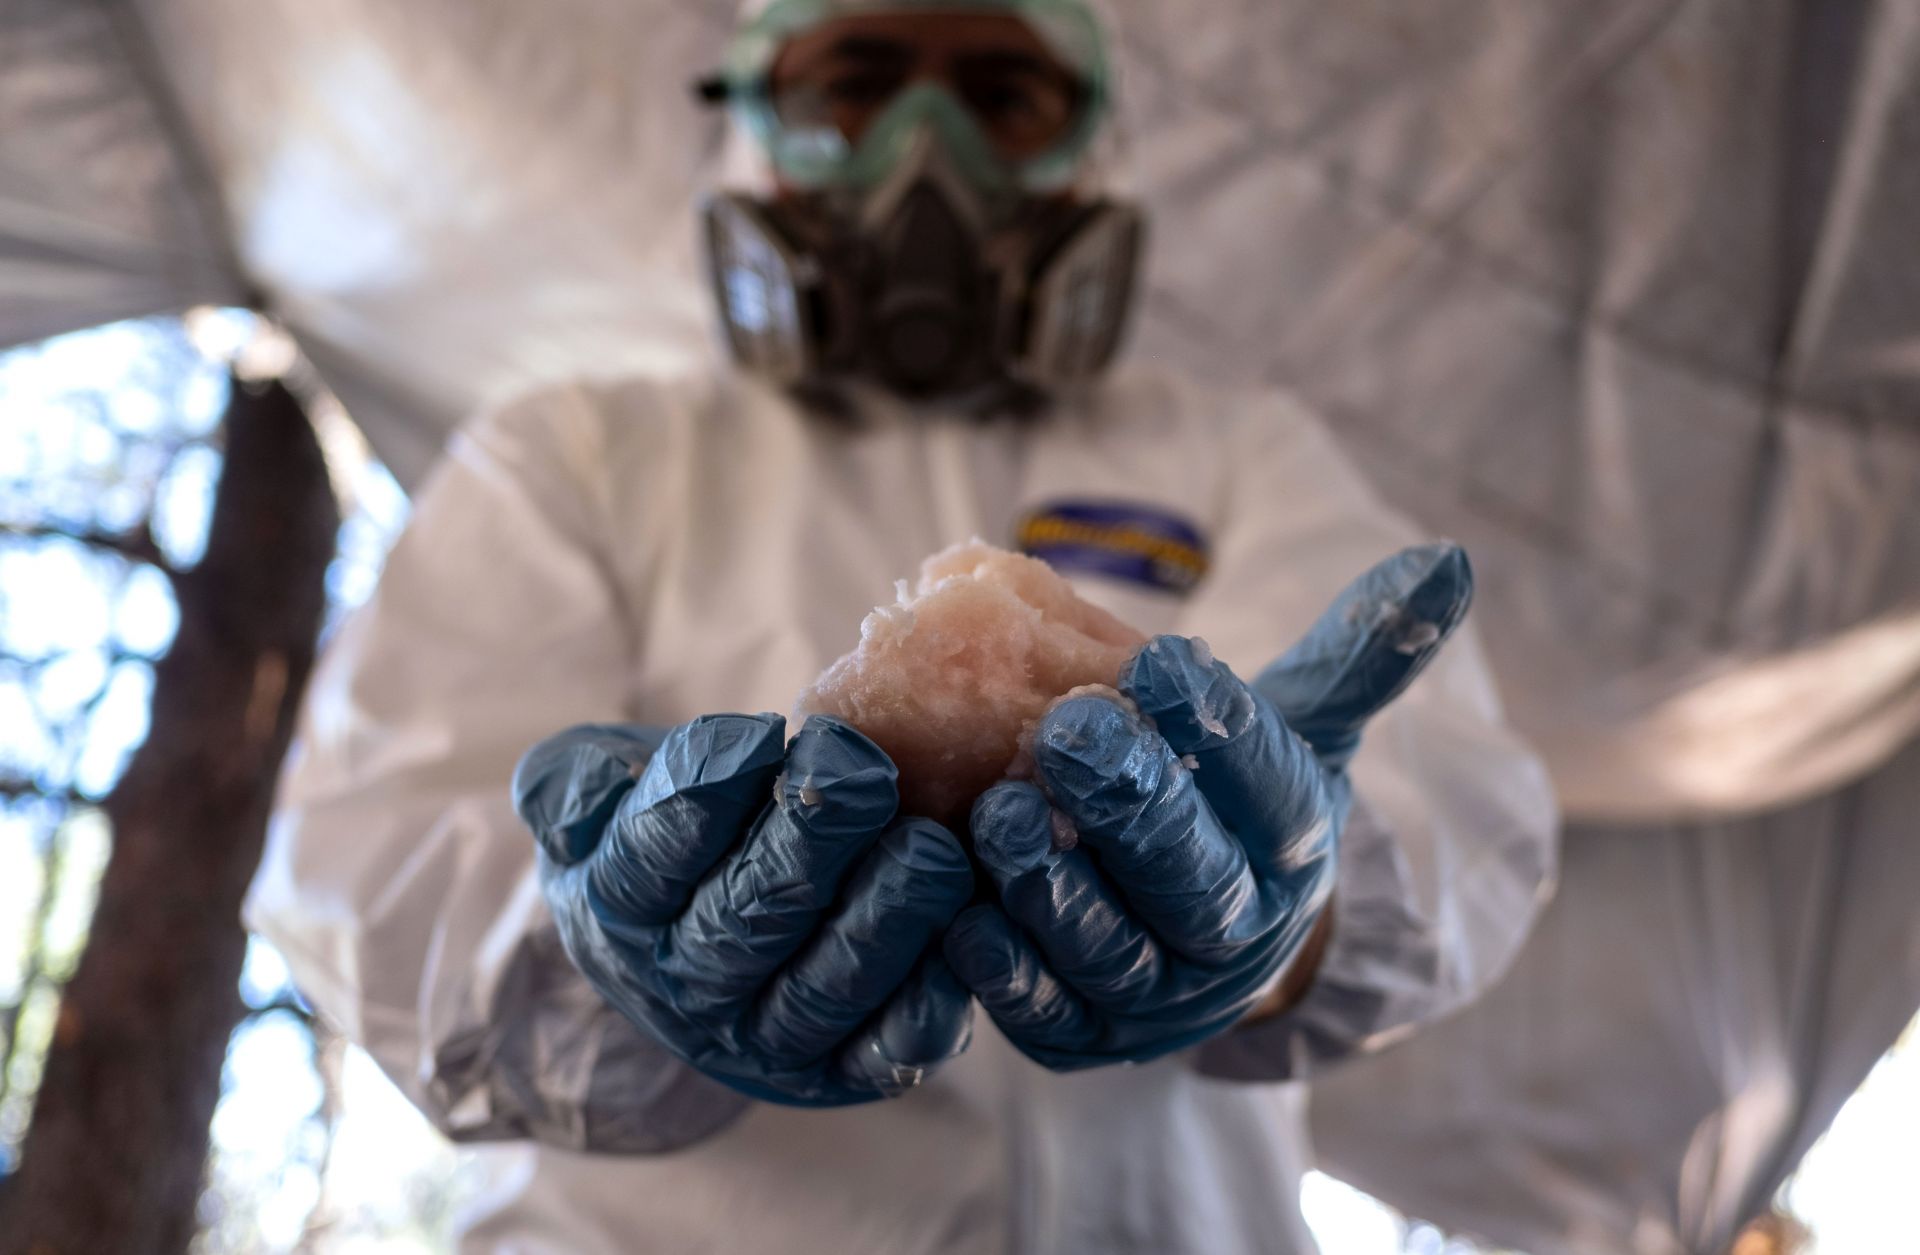 A Mexican Army expert in protective gear displays crystal meth paste at a clandestine laboratory near la Rumorosa town in Tecate, Baja California state, Mexico on Aug. 28.